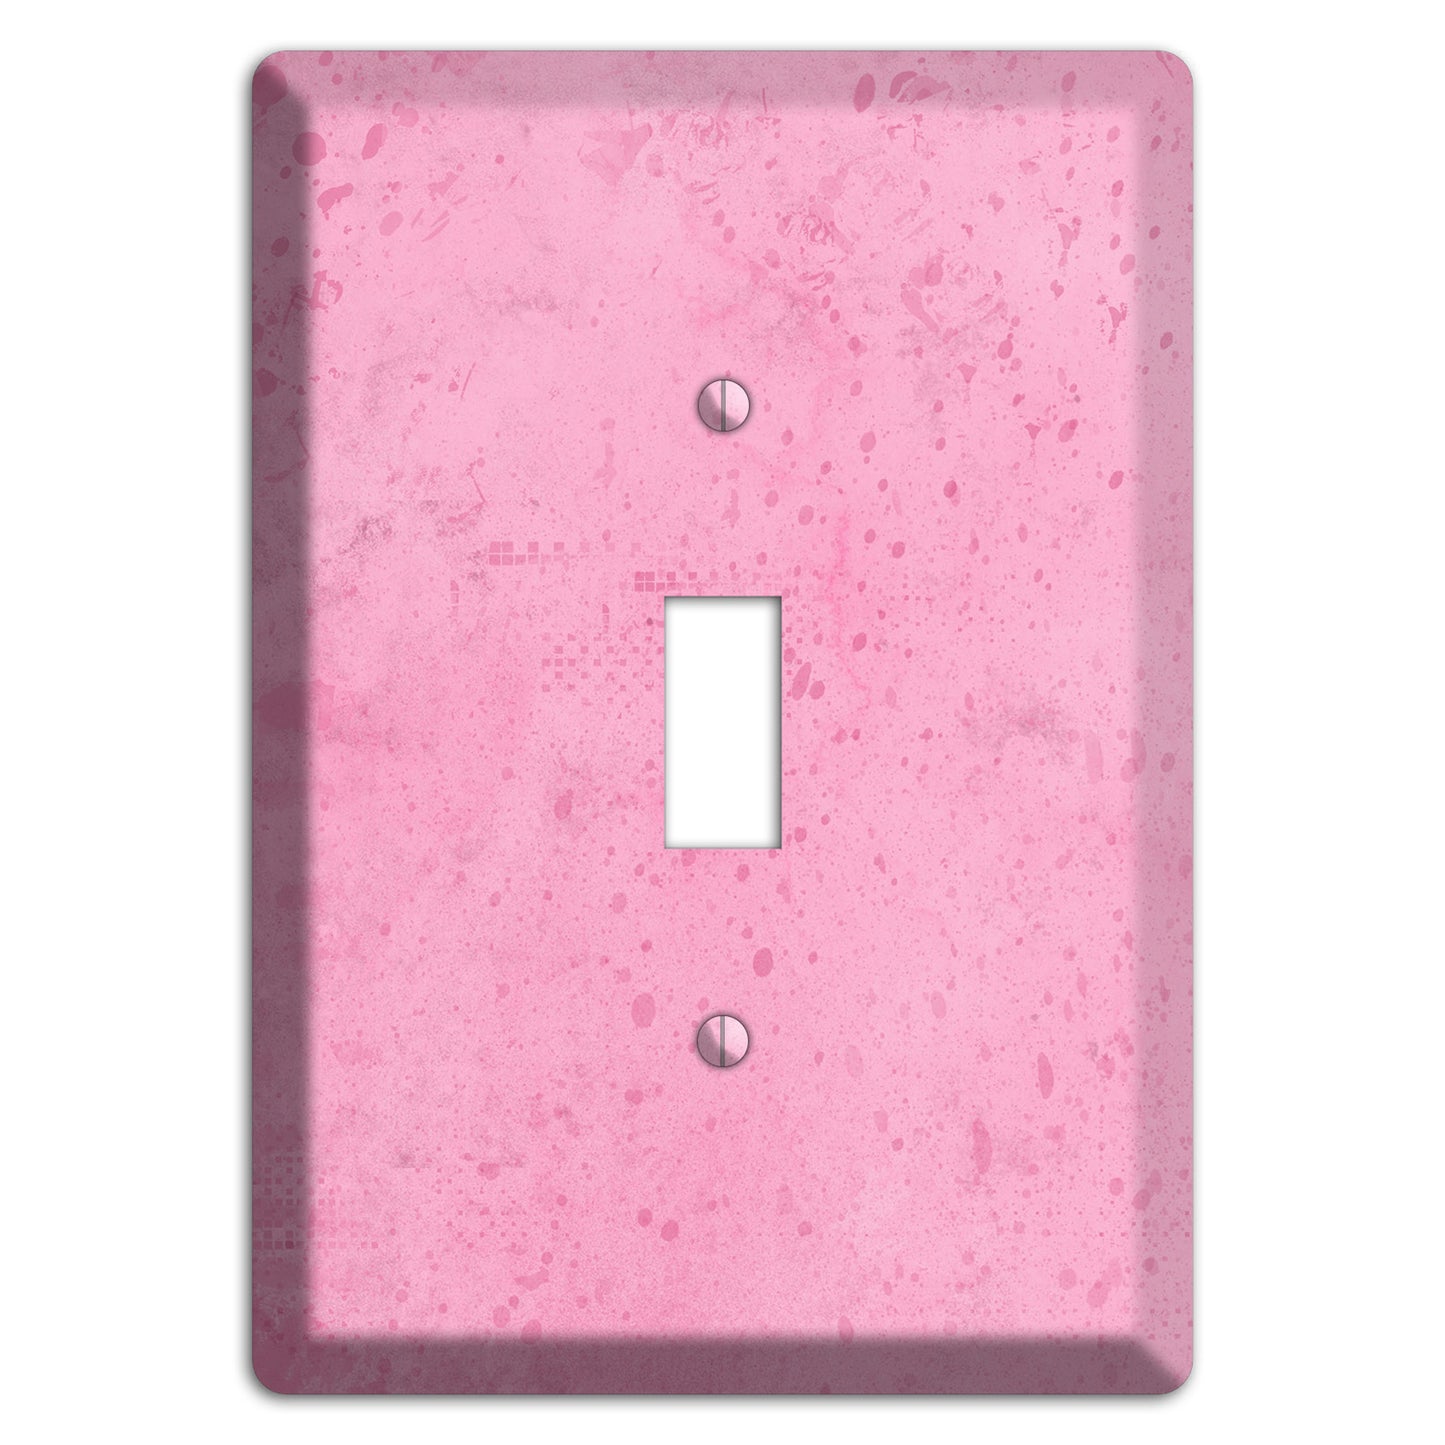 Illusion Pink Texture Cover Plates